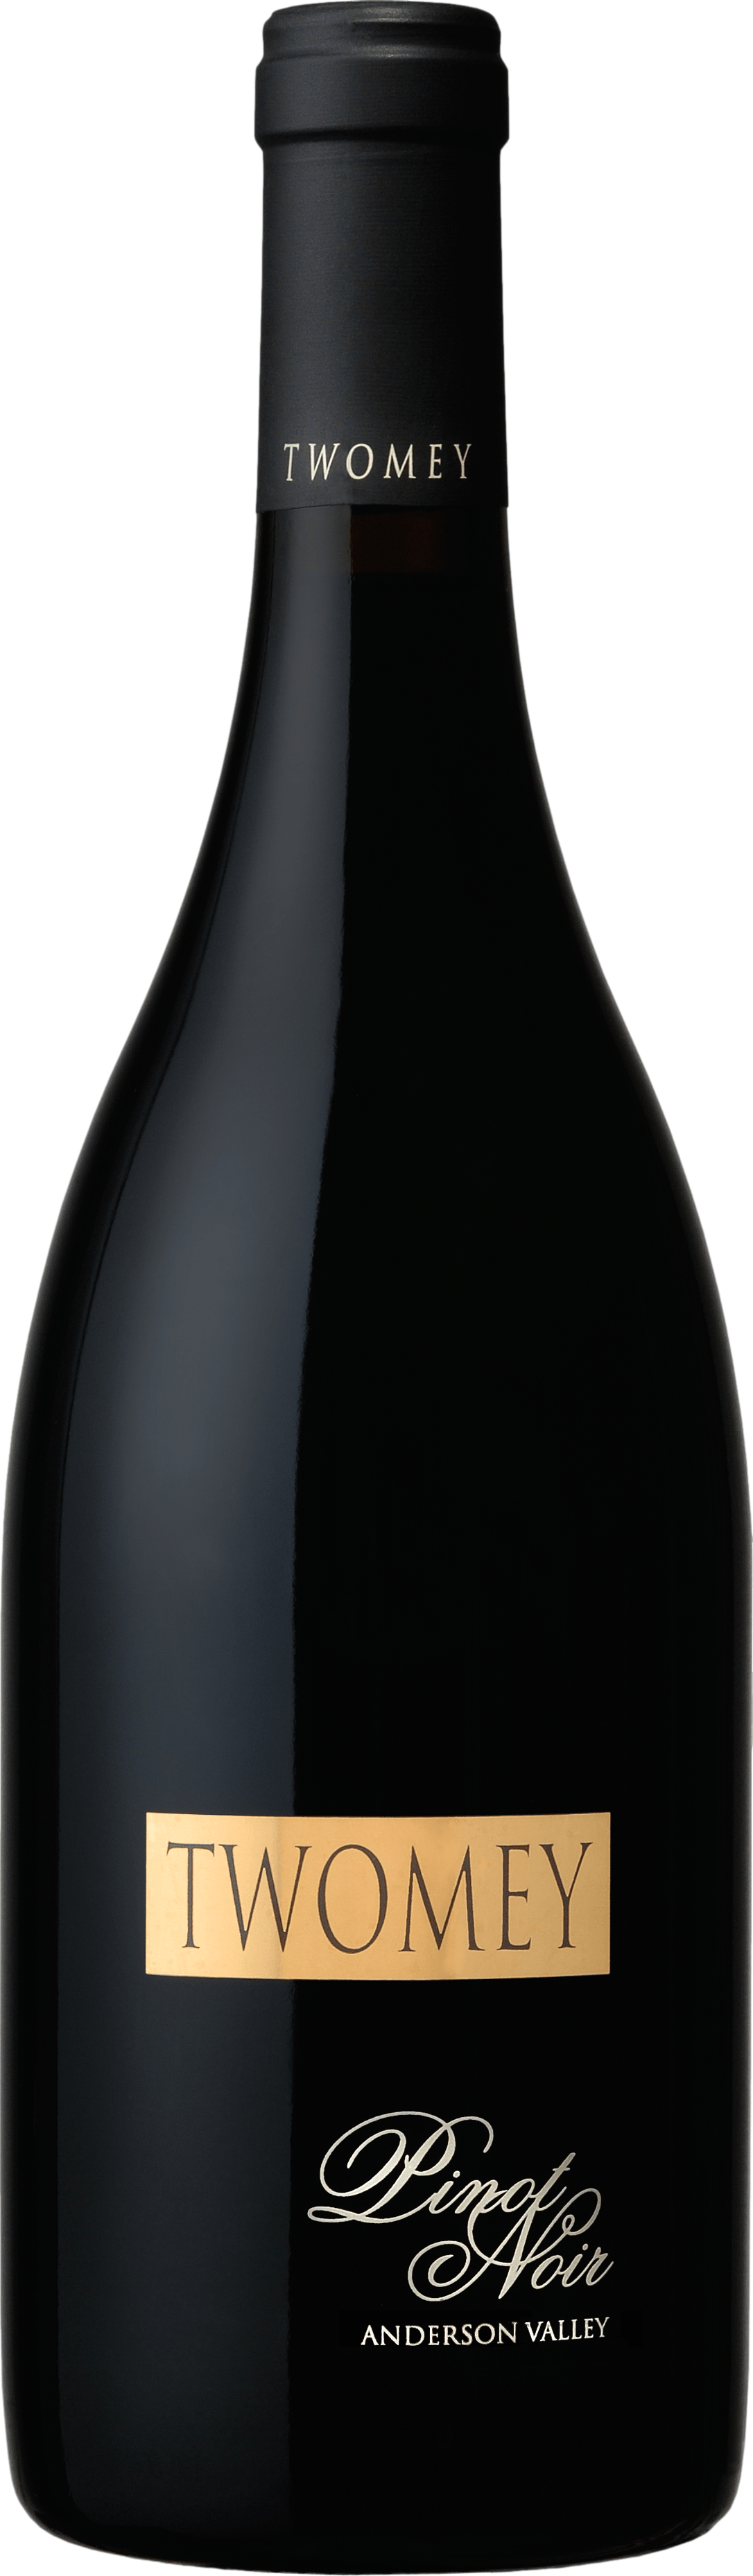 Twomey Pinot Noir Anderson Valley 2015 Silver Oak 8wines DACH